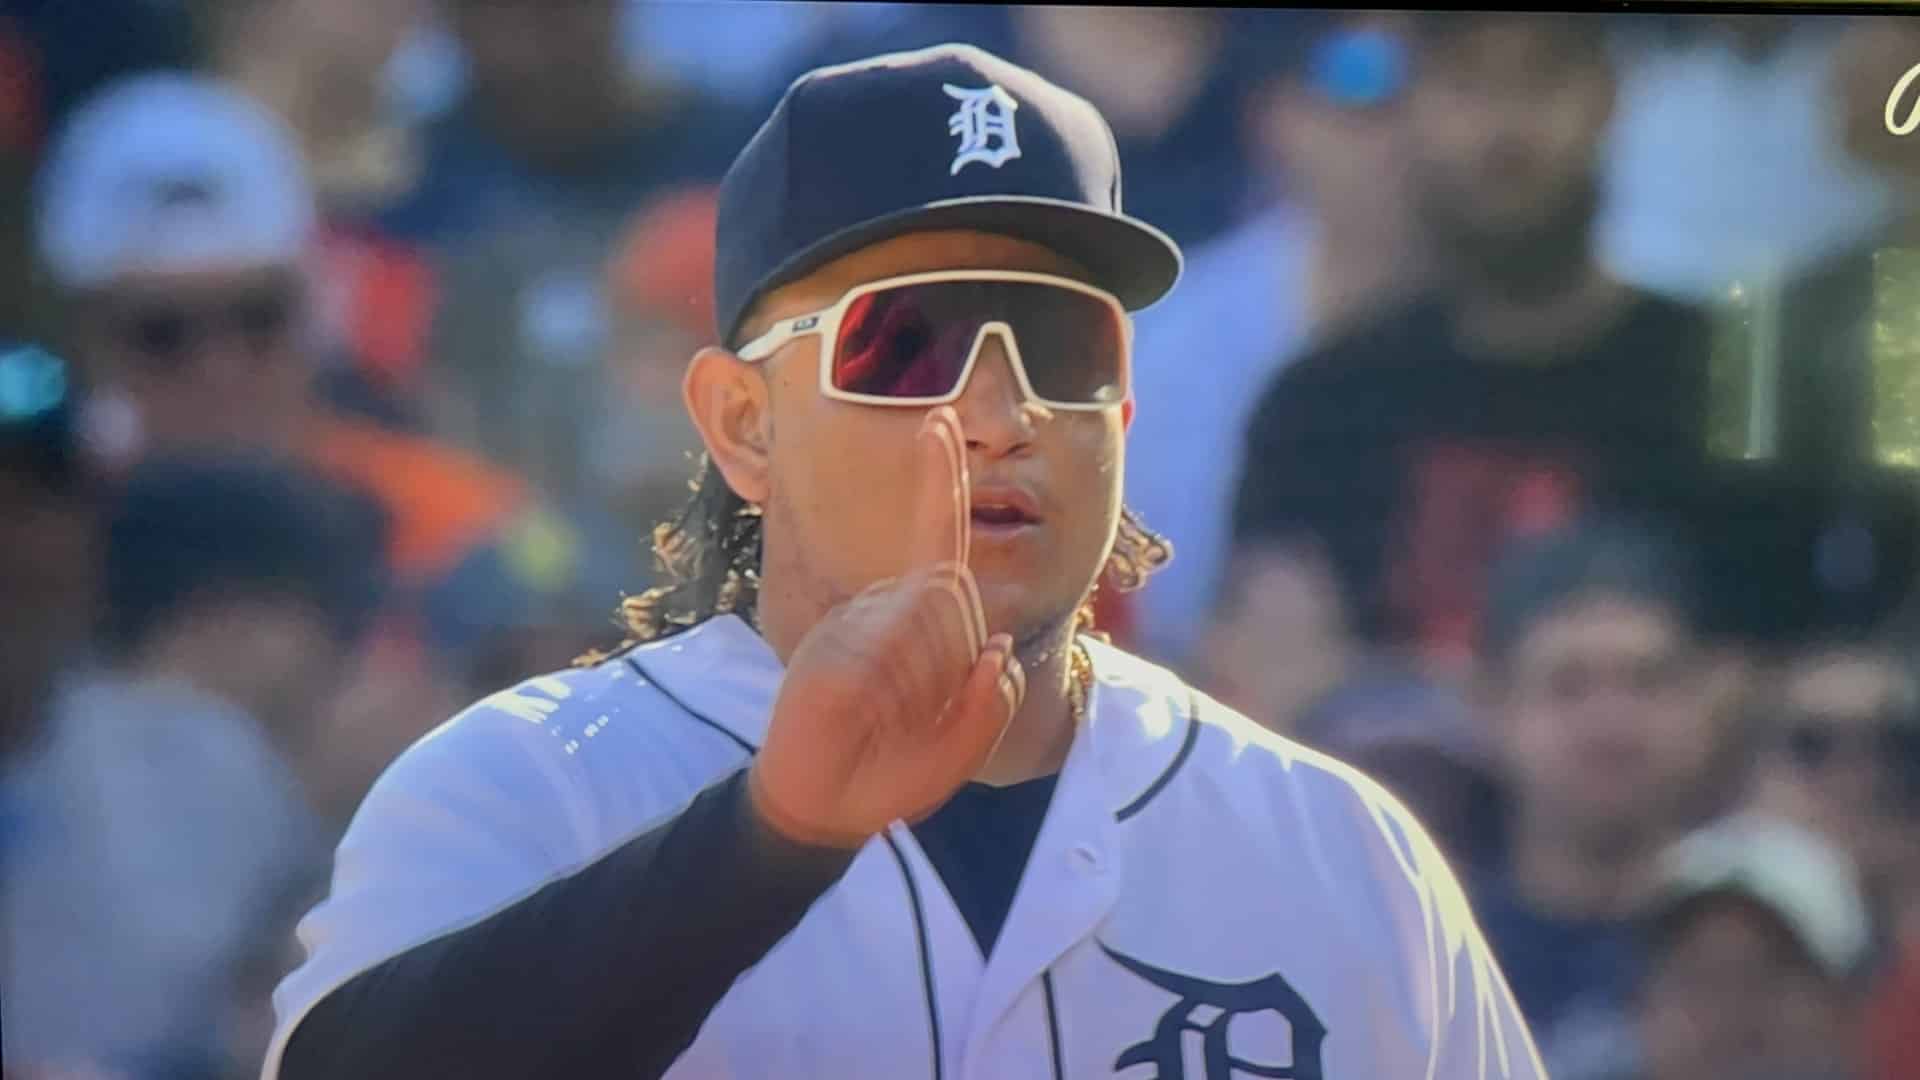 Miguel Cabrera's Final Moment Dan Dickerson Has Perfect Call For Miguel Cabrera Detroit Tigers 40-Man Roster Miguel Cabrera says he will play one final season